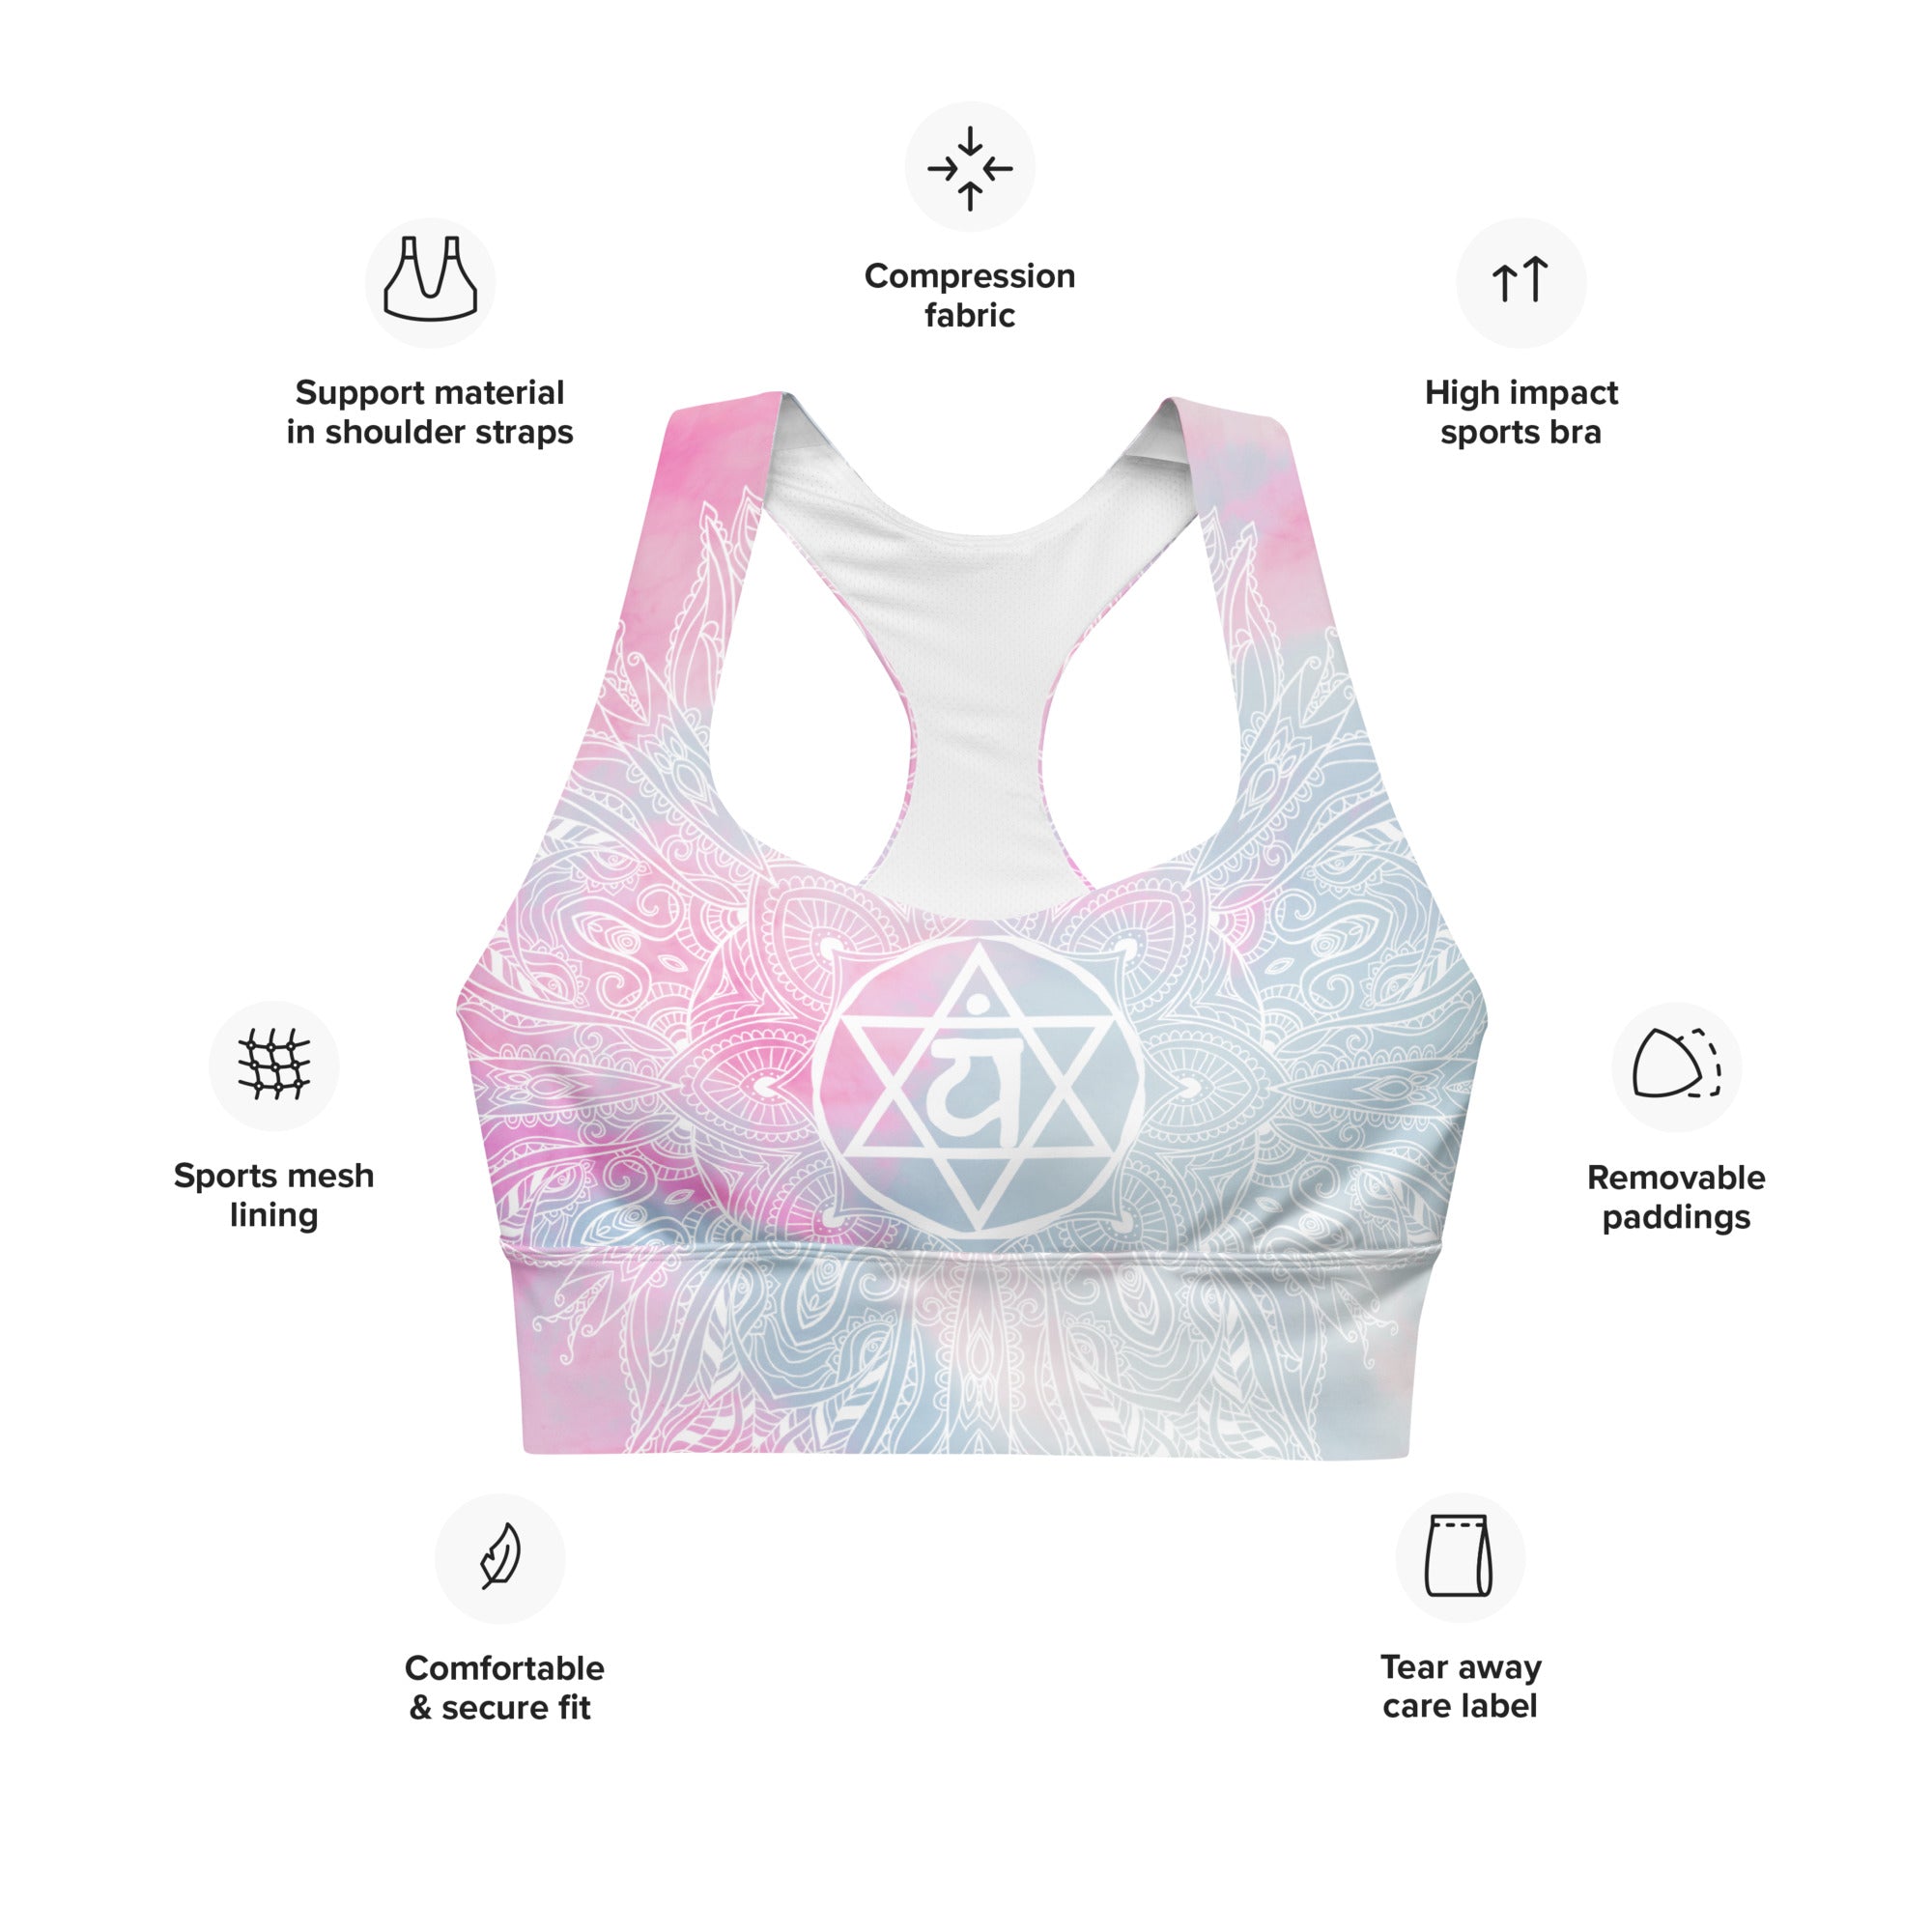 longline sports bra by goddess swag. main colors are pastel pinks and blues. the design overlay on front and back is a white heart chakra mandala design. goddess swag is written on the back in sanskrit style writing